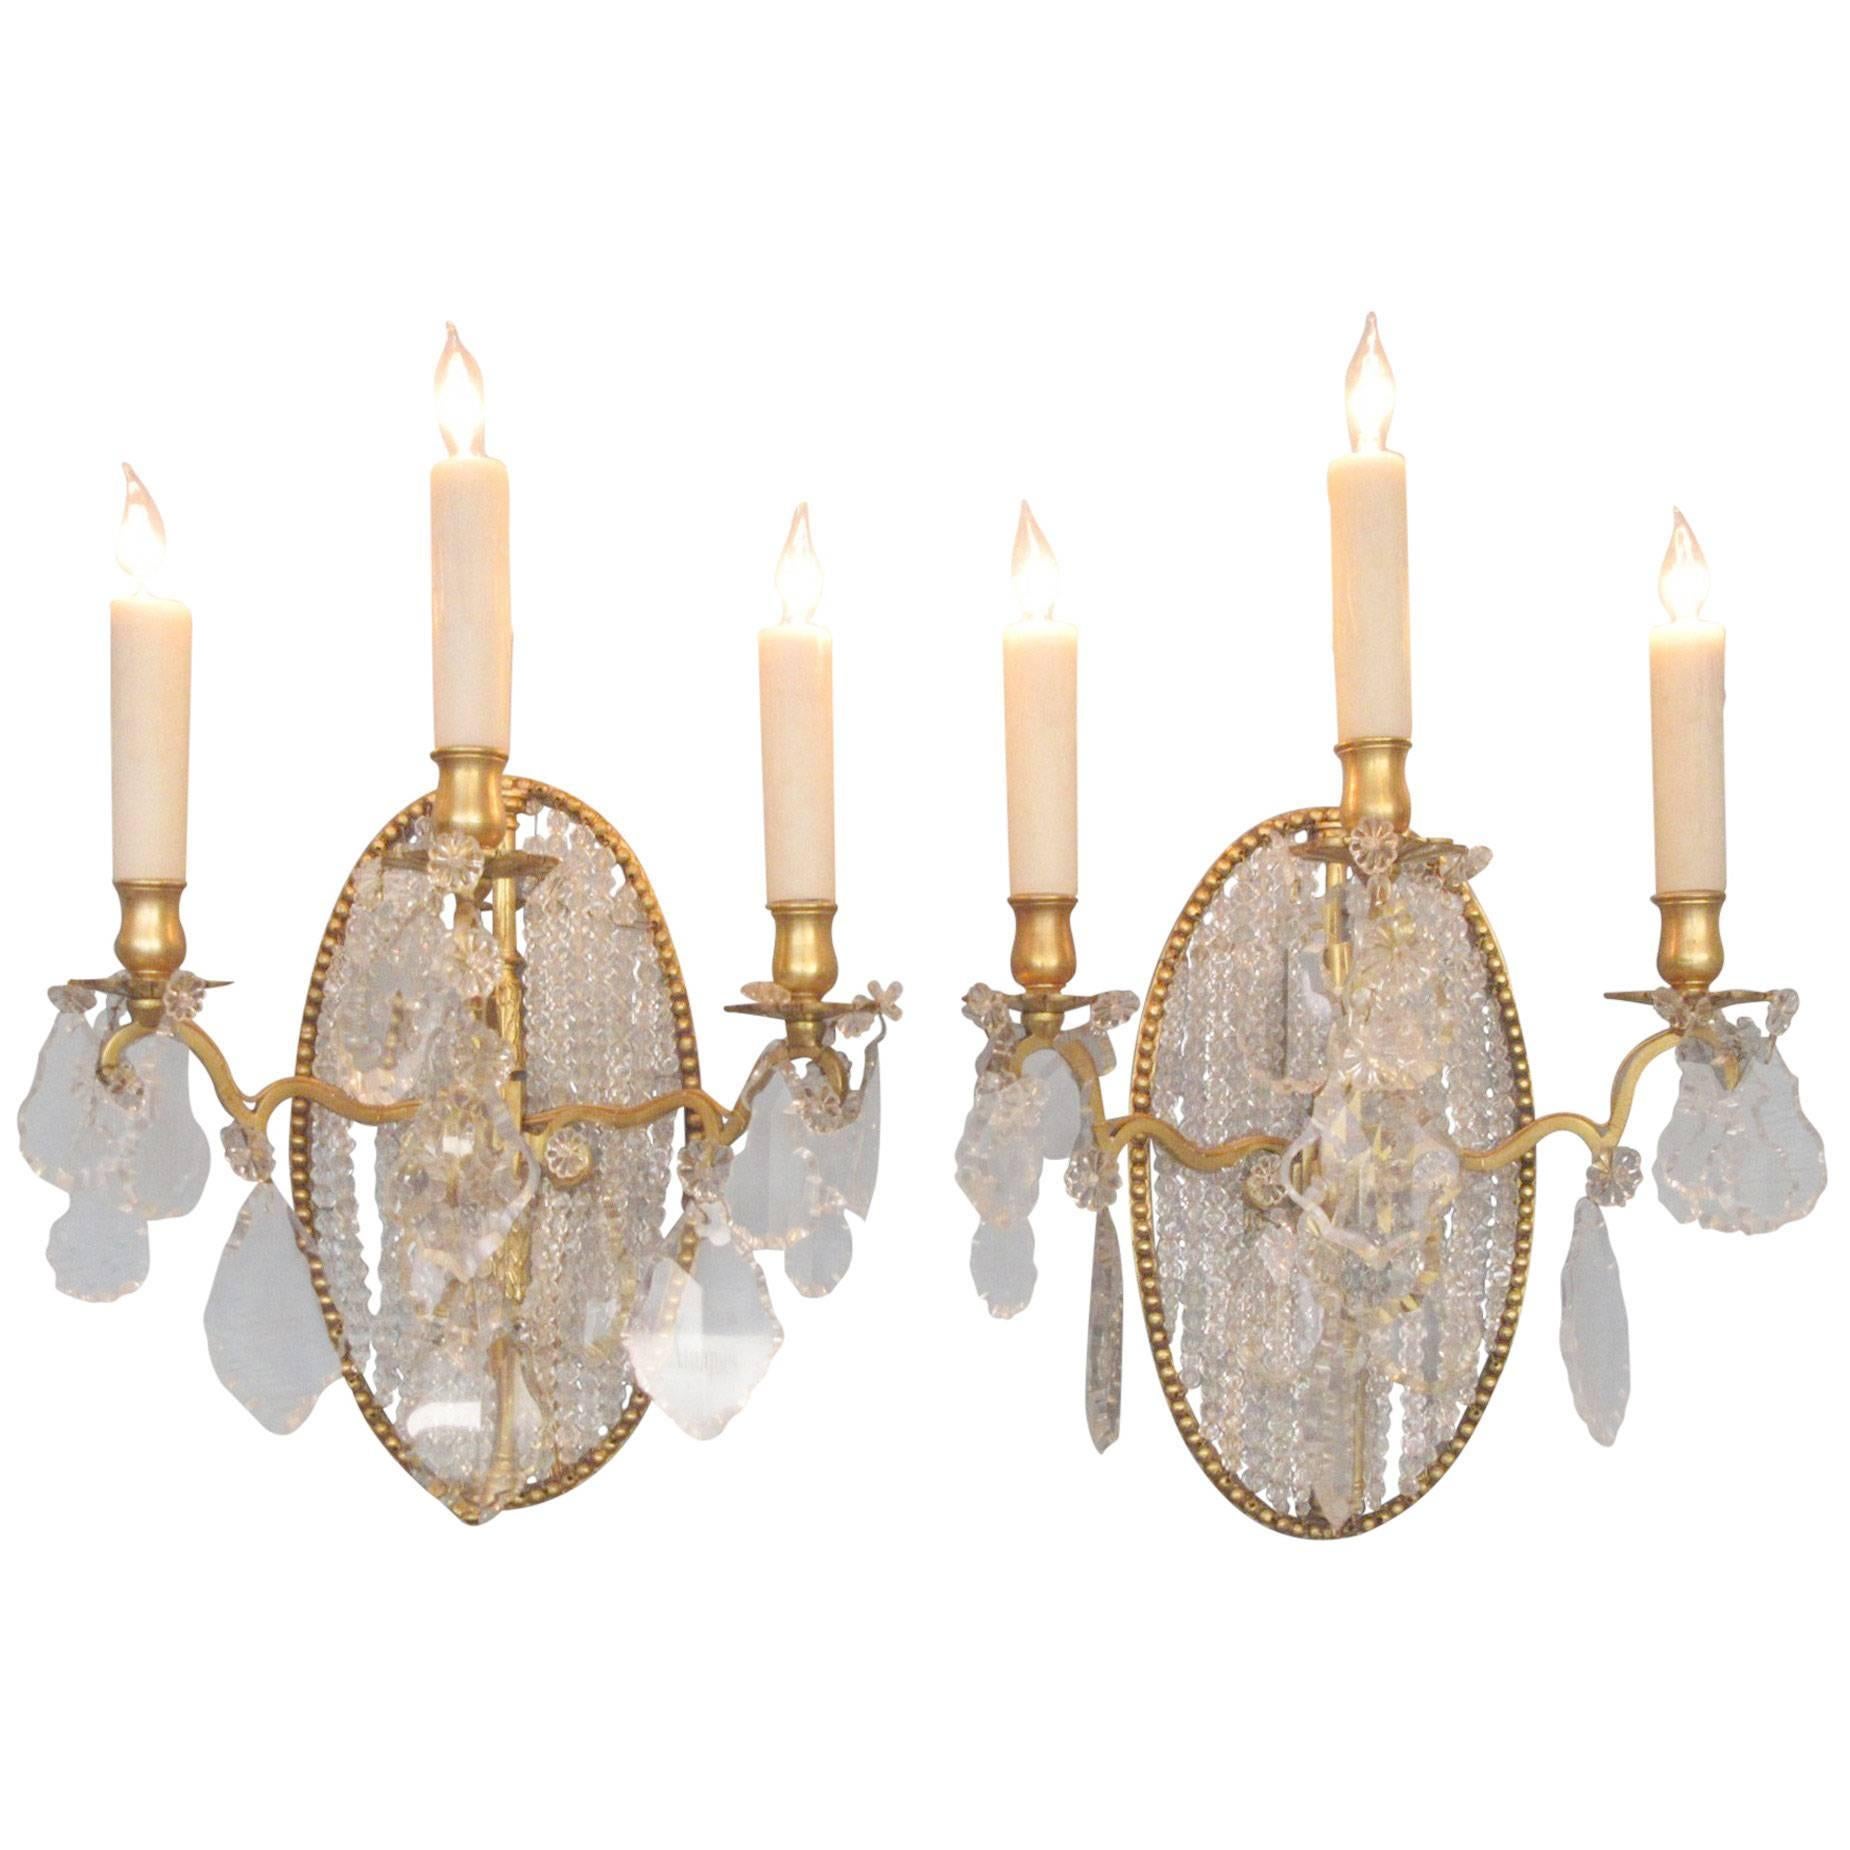 Pair of Early 19th Century Italian Neoclassical Crystal Medallion Back Sconces For Sale